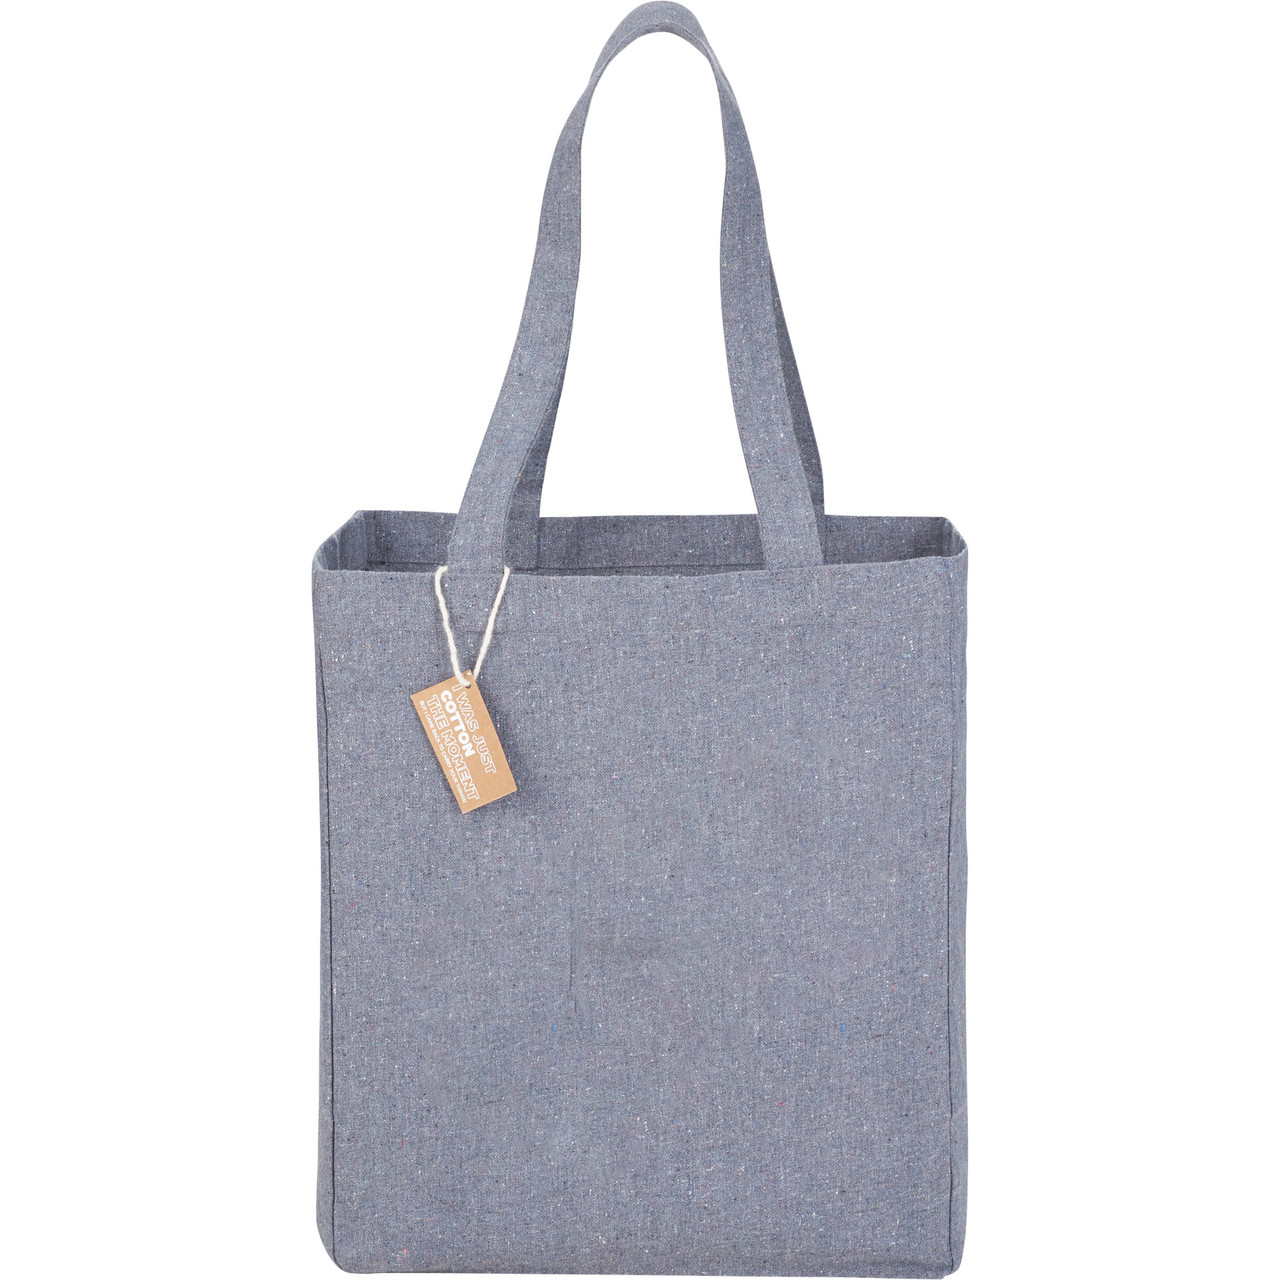 Recycled Cotton Bags  Eco-Friendly Reusable Totes - Organic Blank